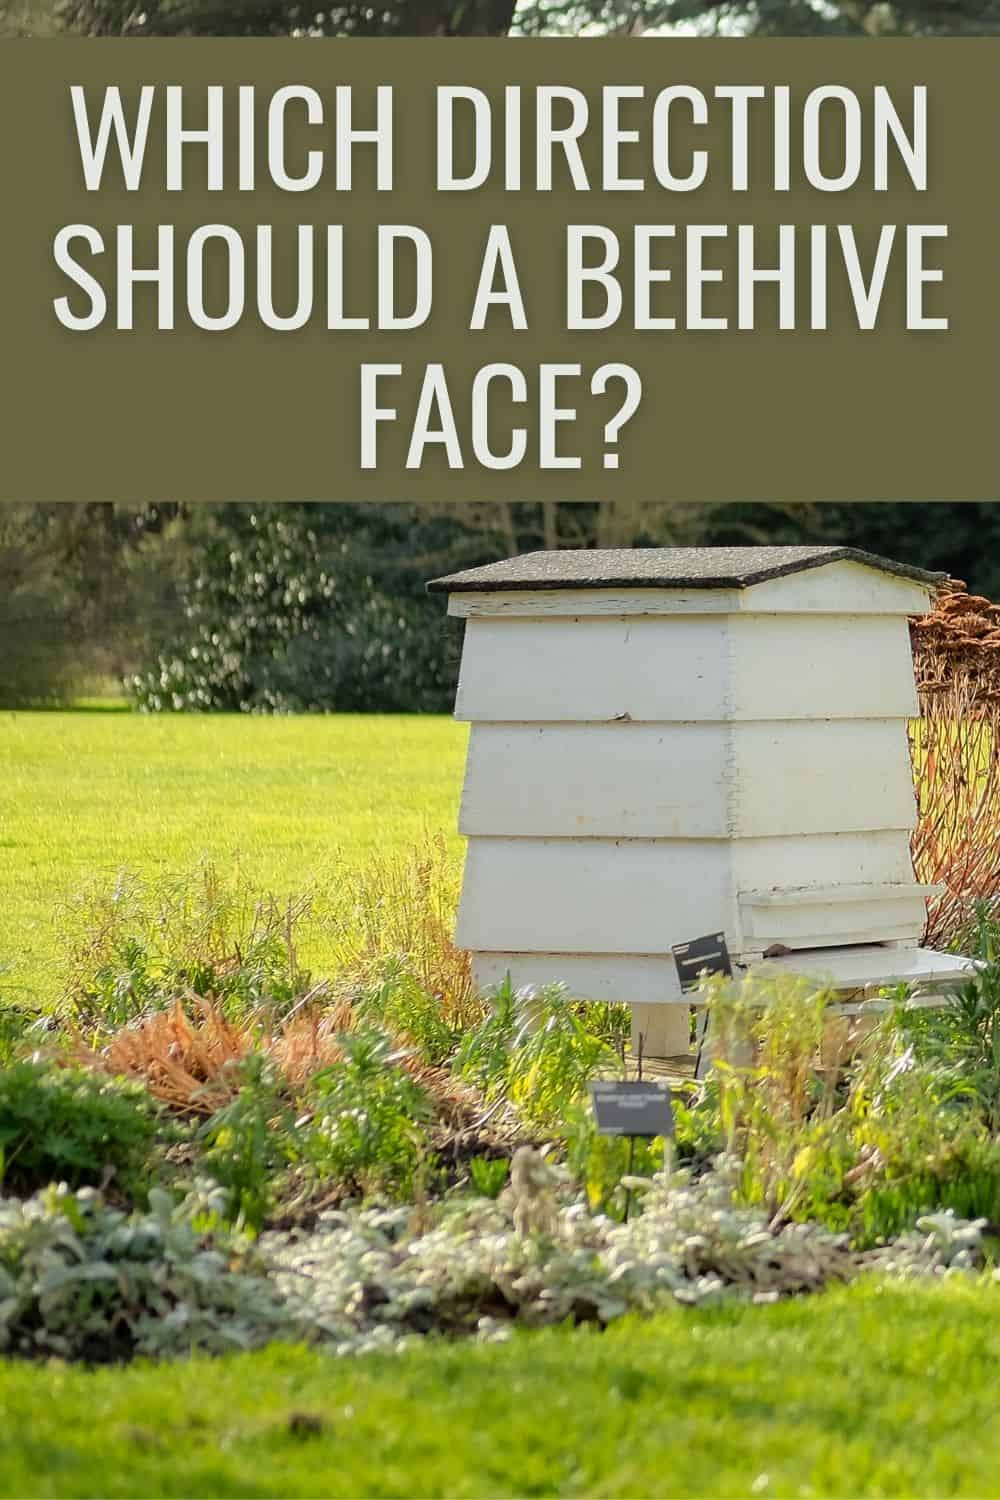 which direction should a beehive face?